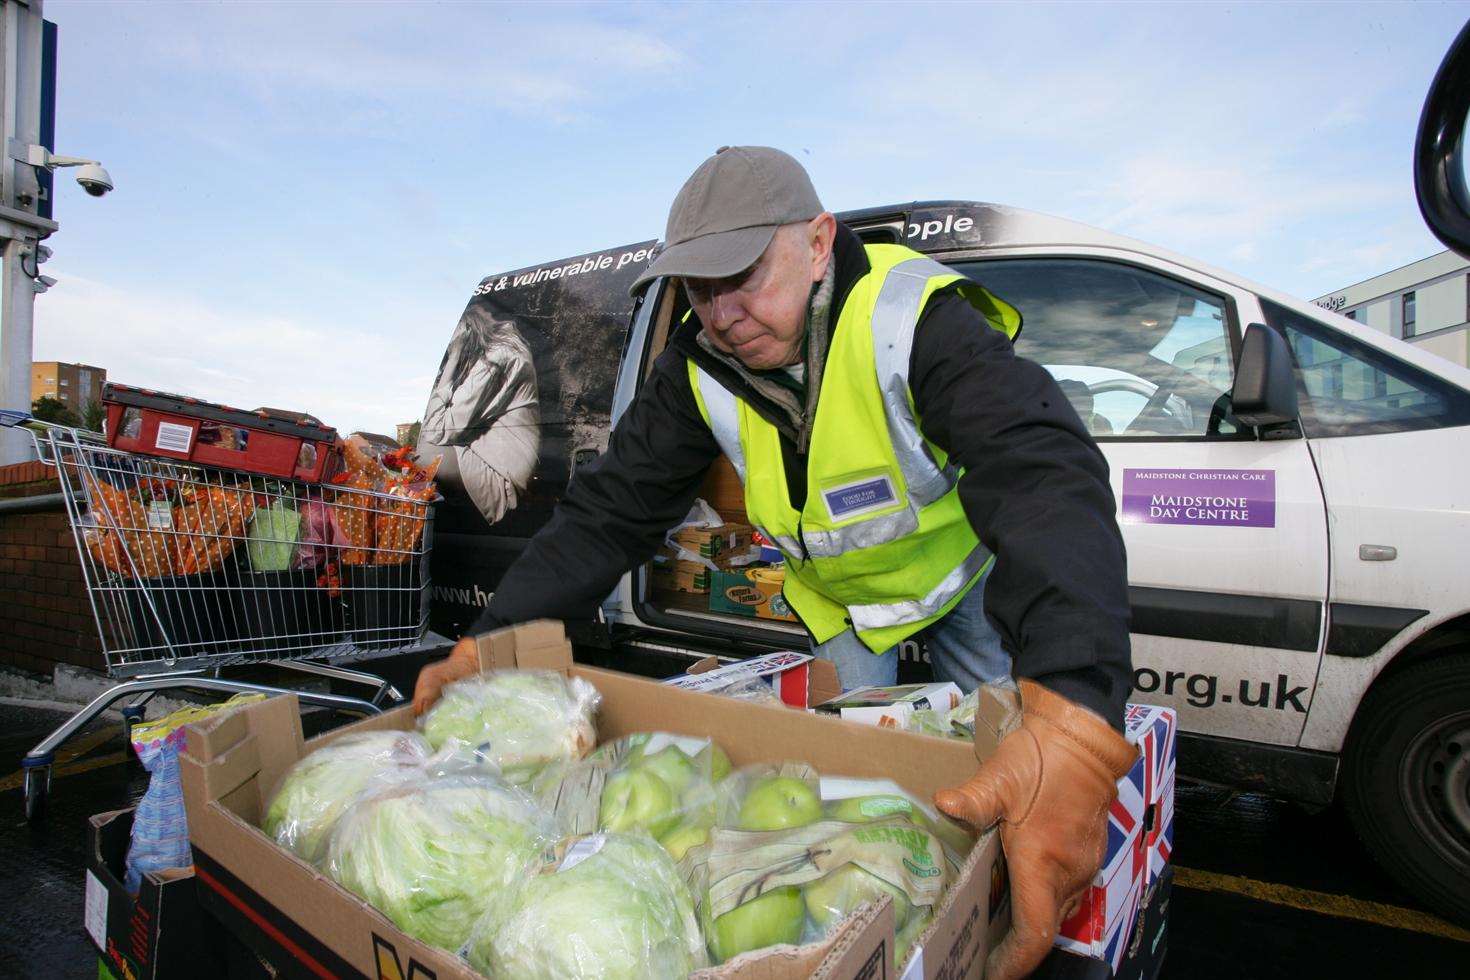 Peter Downs loads a pallet of stock from a supermarket to help the "hidden homeless" who need an emergency food par